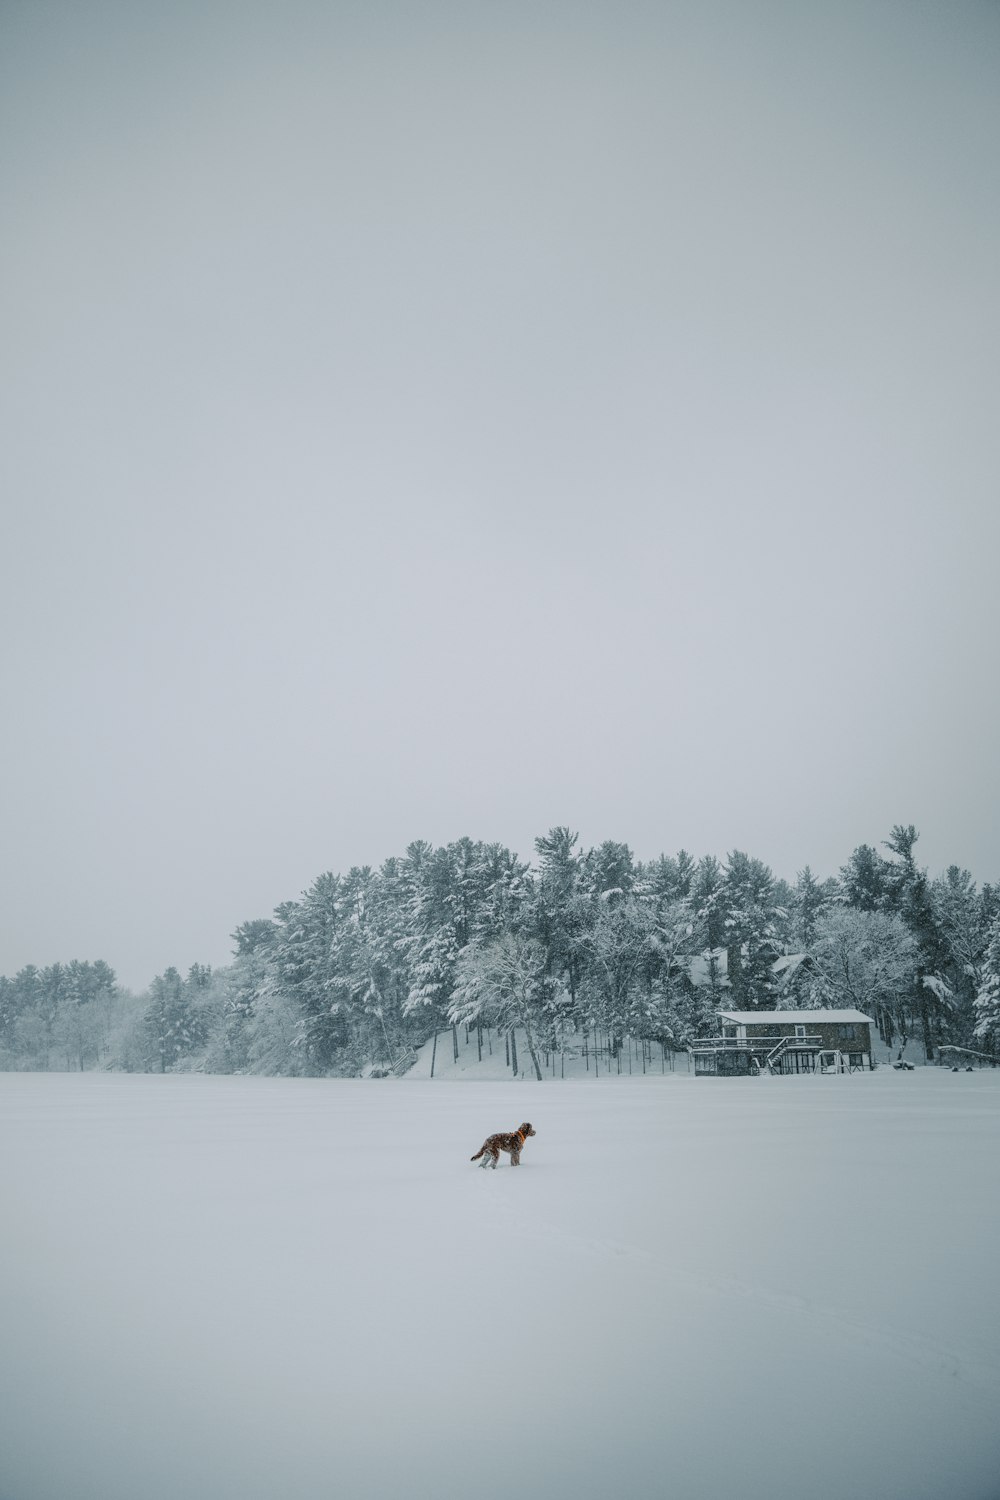 brown dog running on snow covered ground during daytime